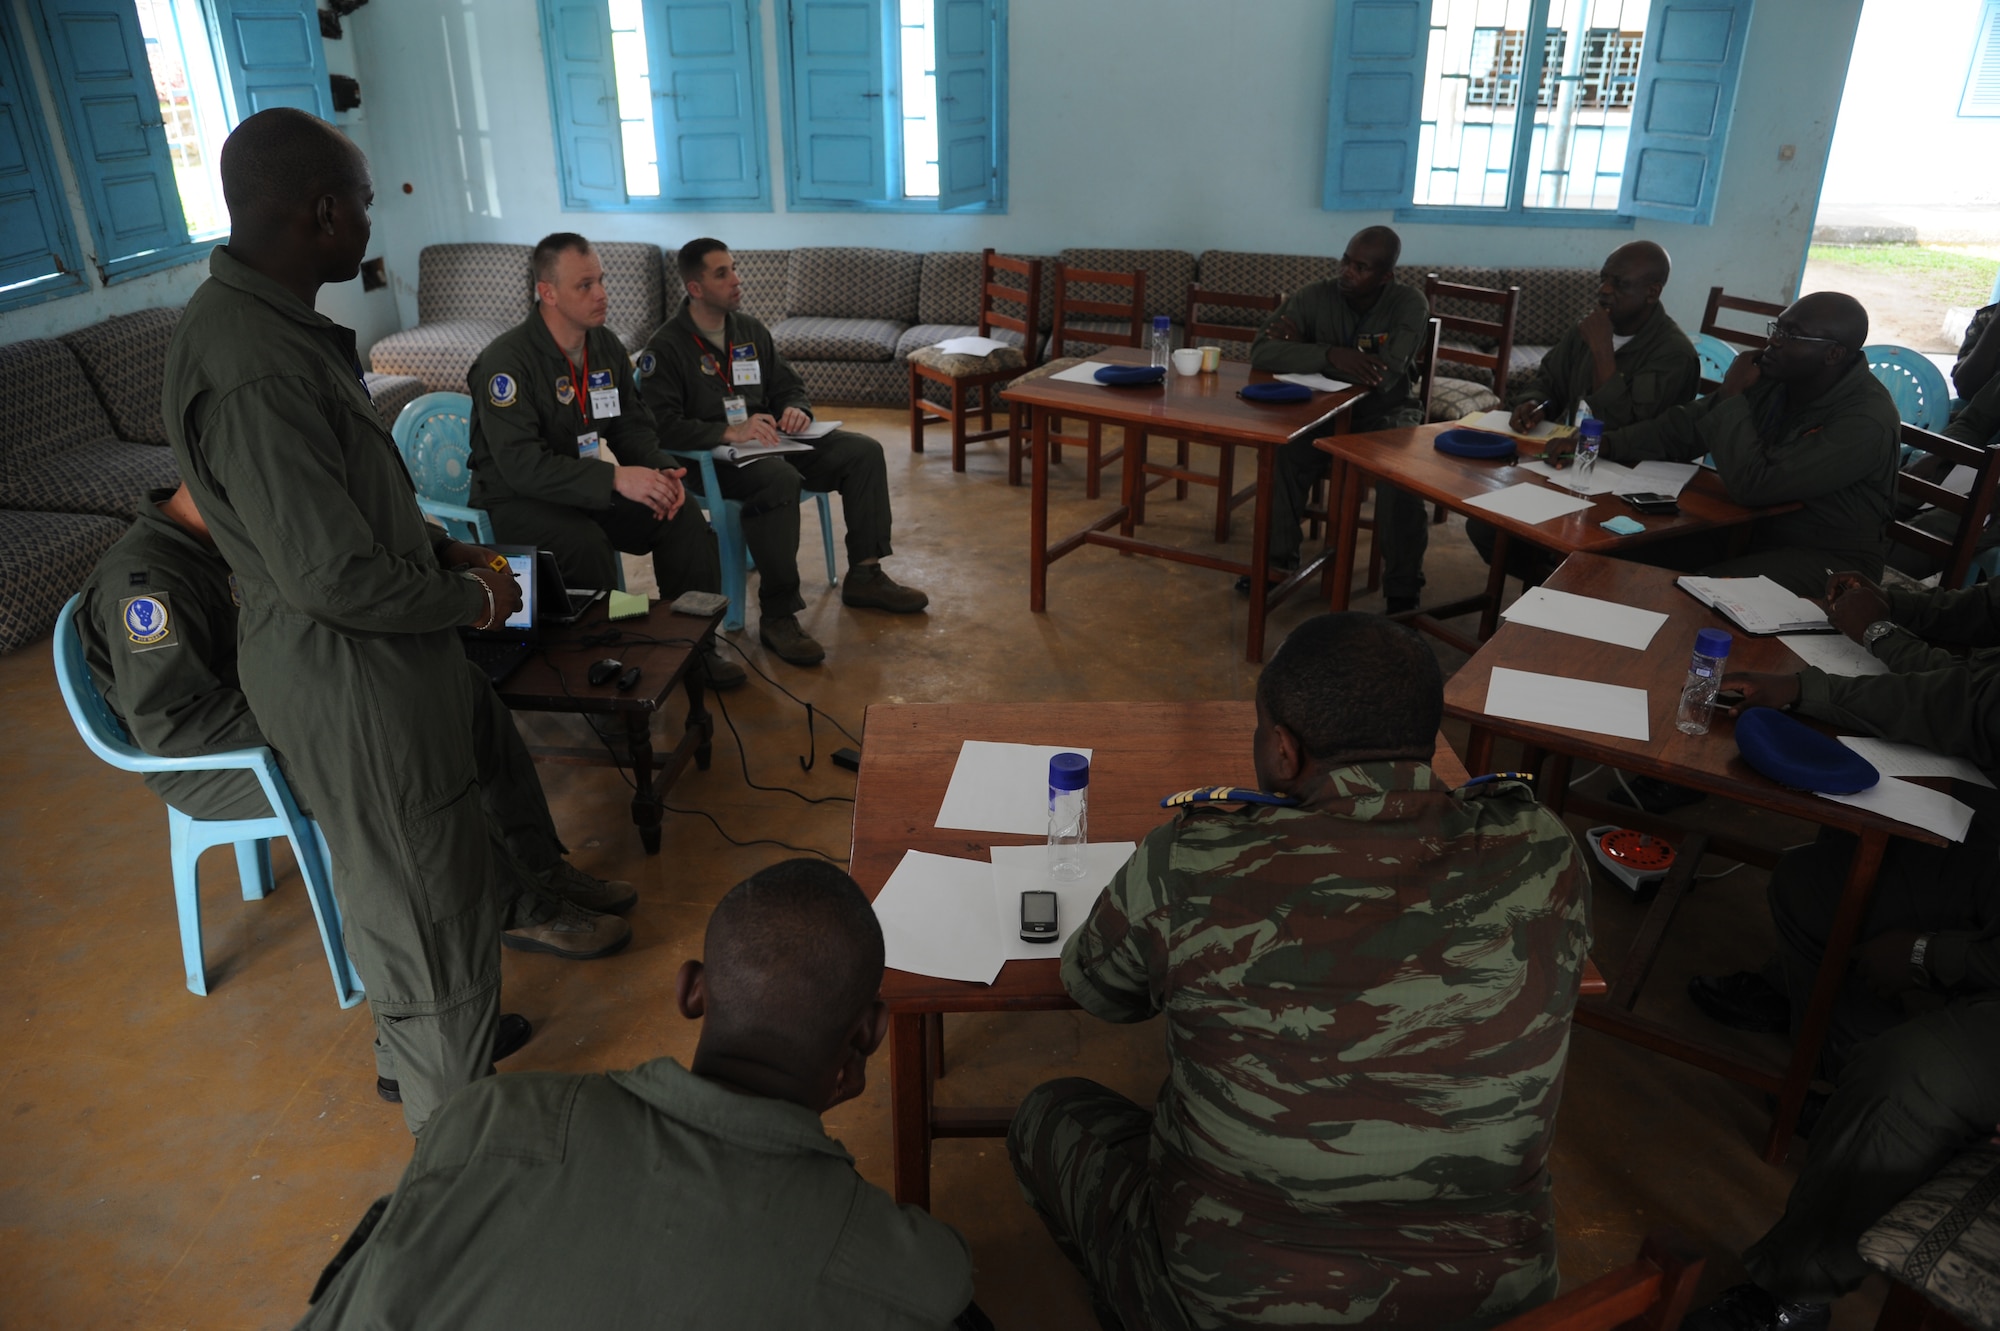 DOUALA, CAMEROON – U.S. Air Force air advisors assigned to the 818th Mobility Support Advisory Squadron, Joint Base McGuire-Dix-Lakehurst, N.J. and Cameroon Air Force personnel, share ideas regarding aerial delivery systems at Douala Air Force Base, Douala, Cameroon, Feb. 21, 2013. Central Accord 2013 is a joint exercise in which U.S., Cameroon and neighboring Central African militaries partner to promote regional cooperation while and increasing aerial resupply and medical readiness capacity. (Photo by Master Sgt. Stan Parker, 621st CRW Public Affairs)